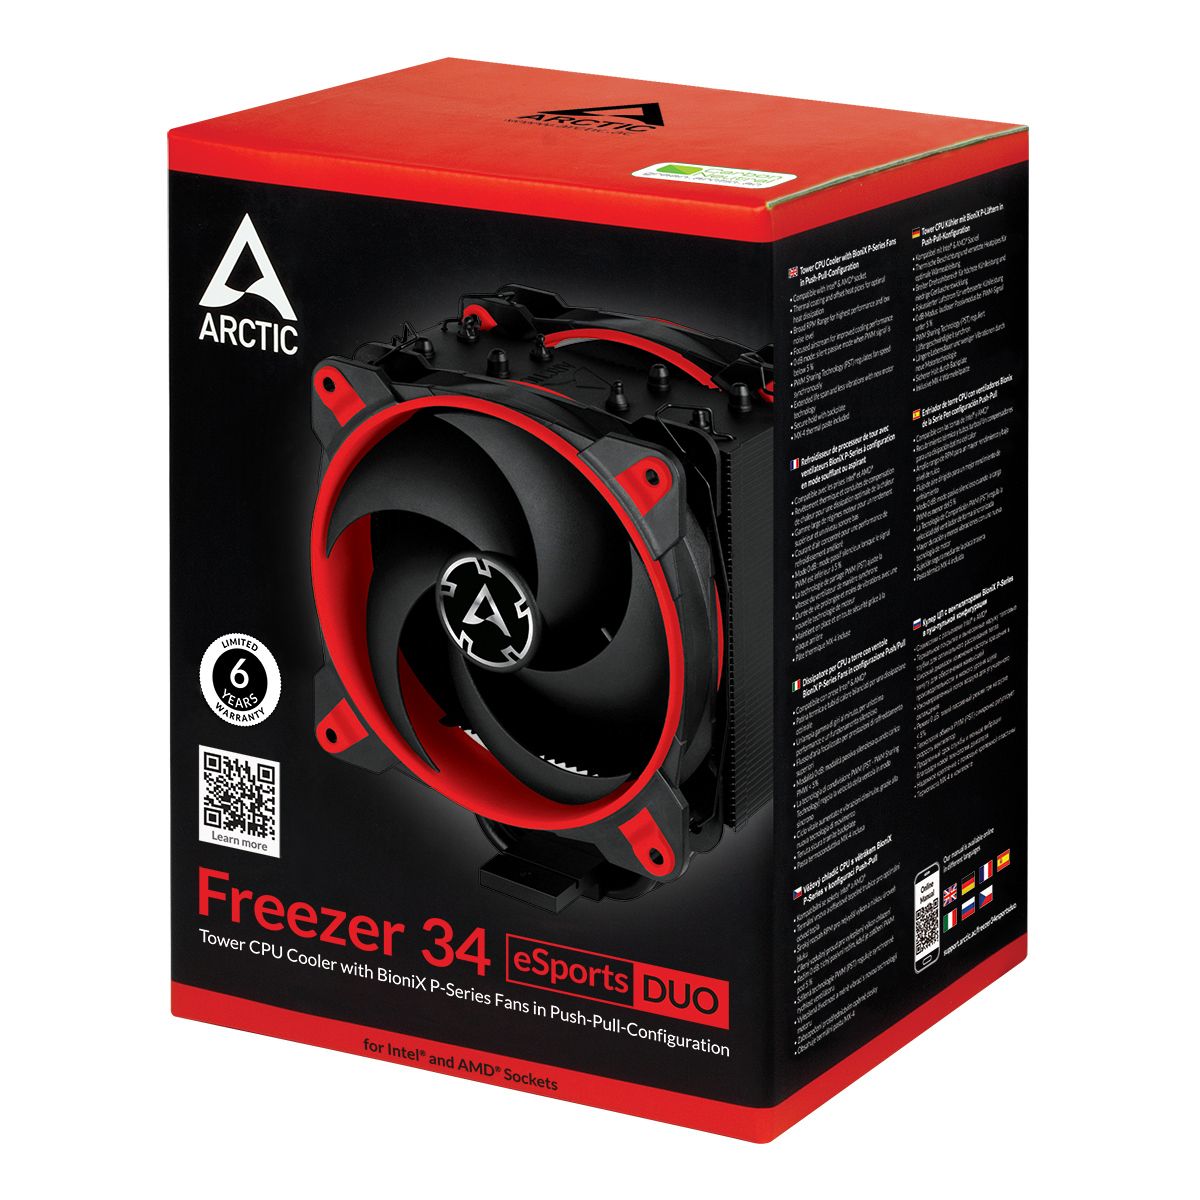 Tower CPU Cooler with Push-Pull Configuration ARCTIC Freezer 34 eSports DUO (Red) Packaging Front View